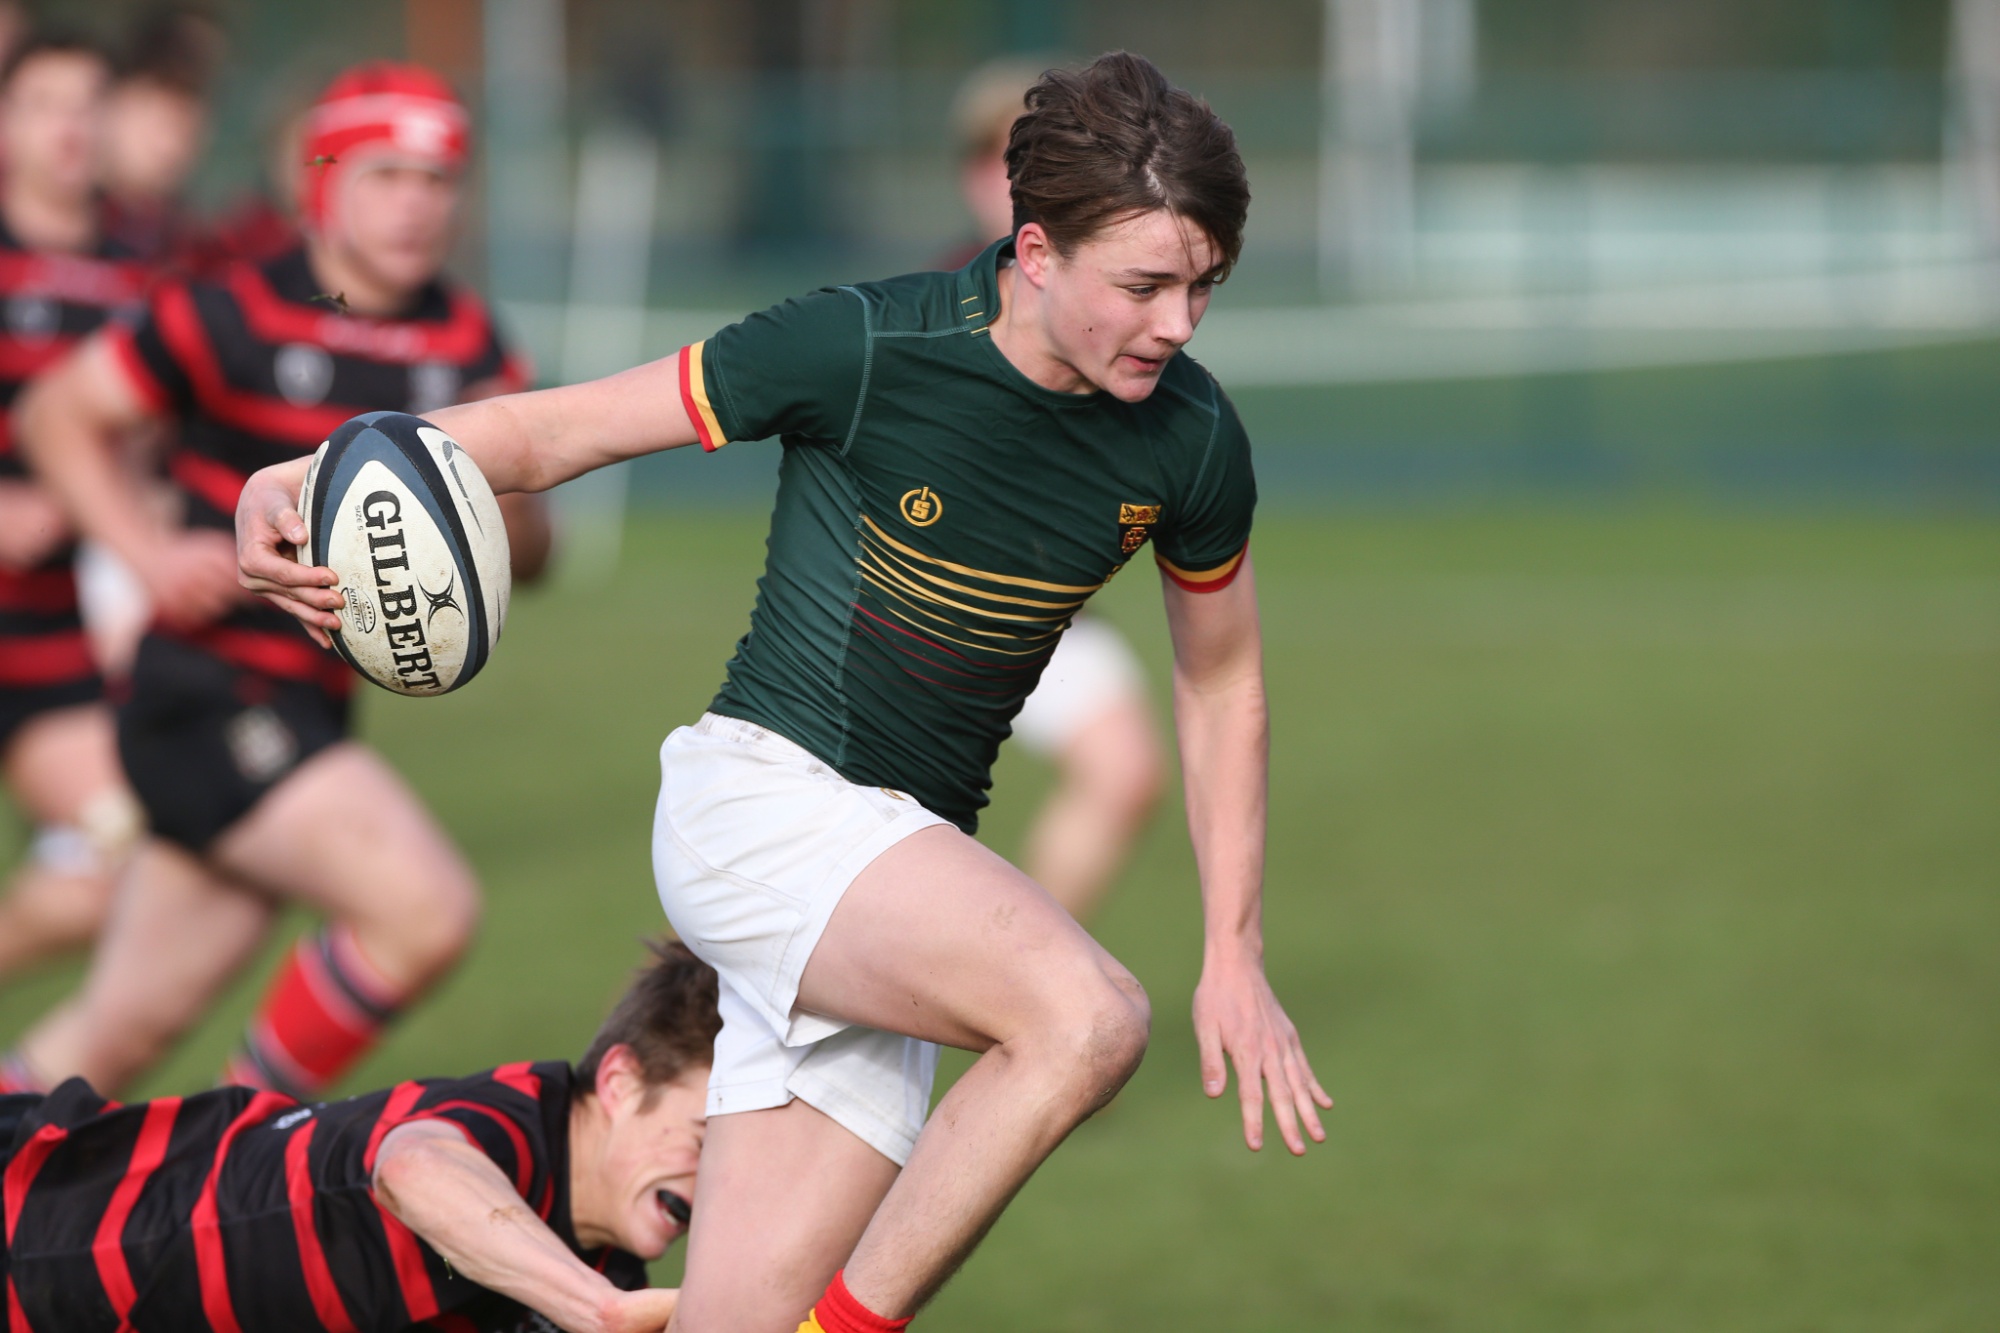 St Benedict's 1st XV finish 3rd in rugby Daily Mail Schools Trophy